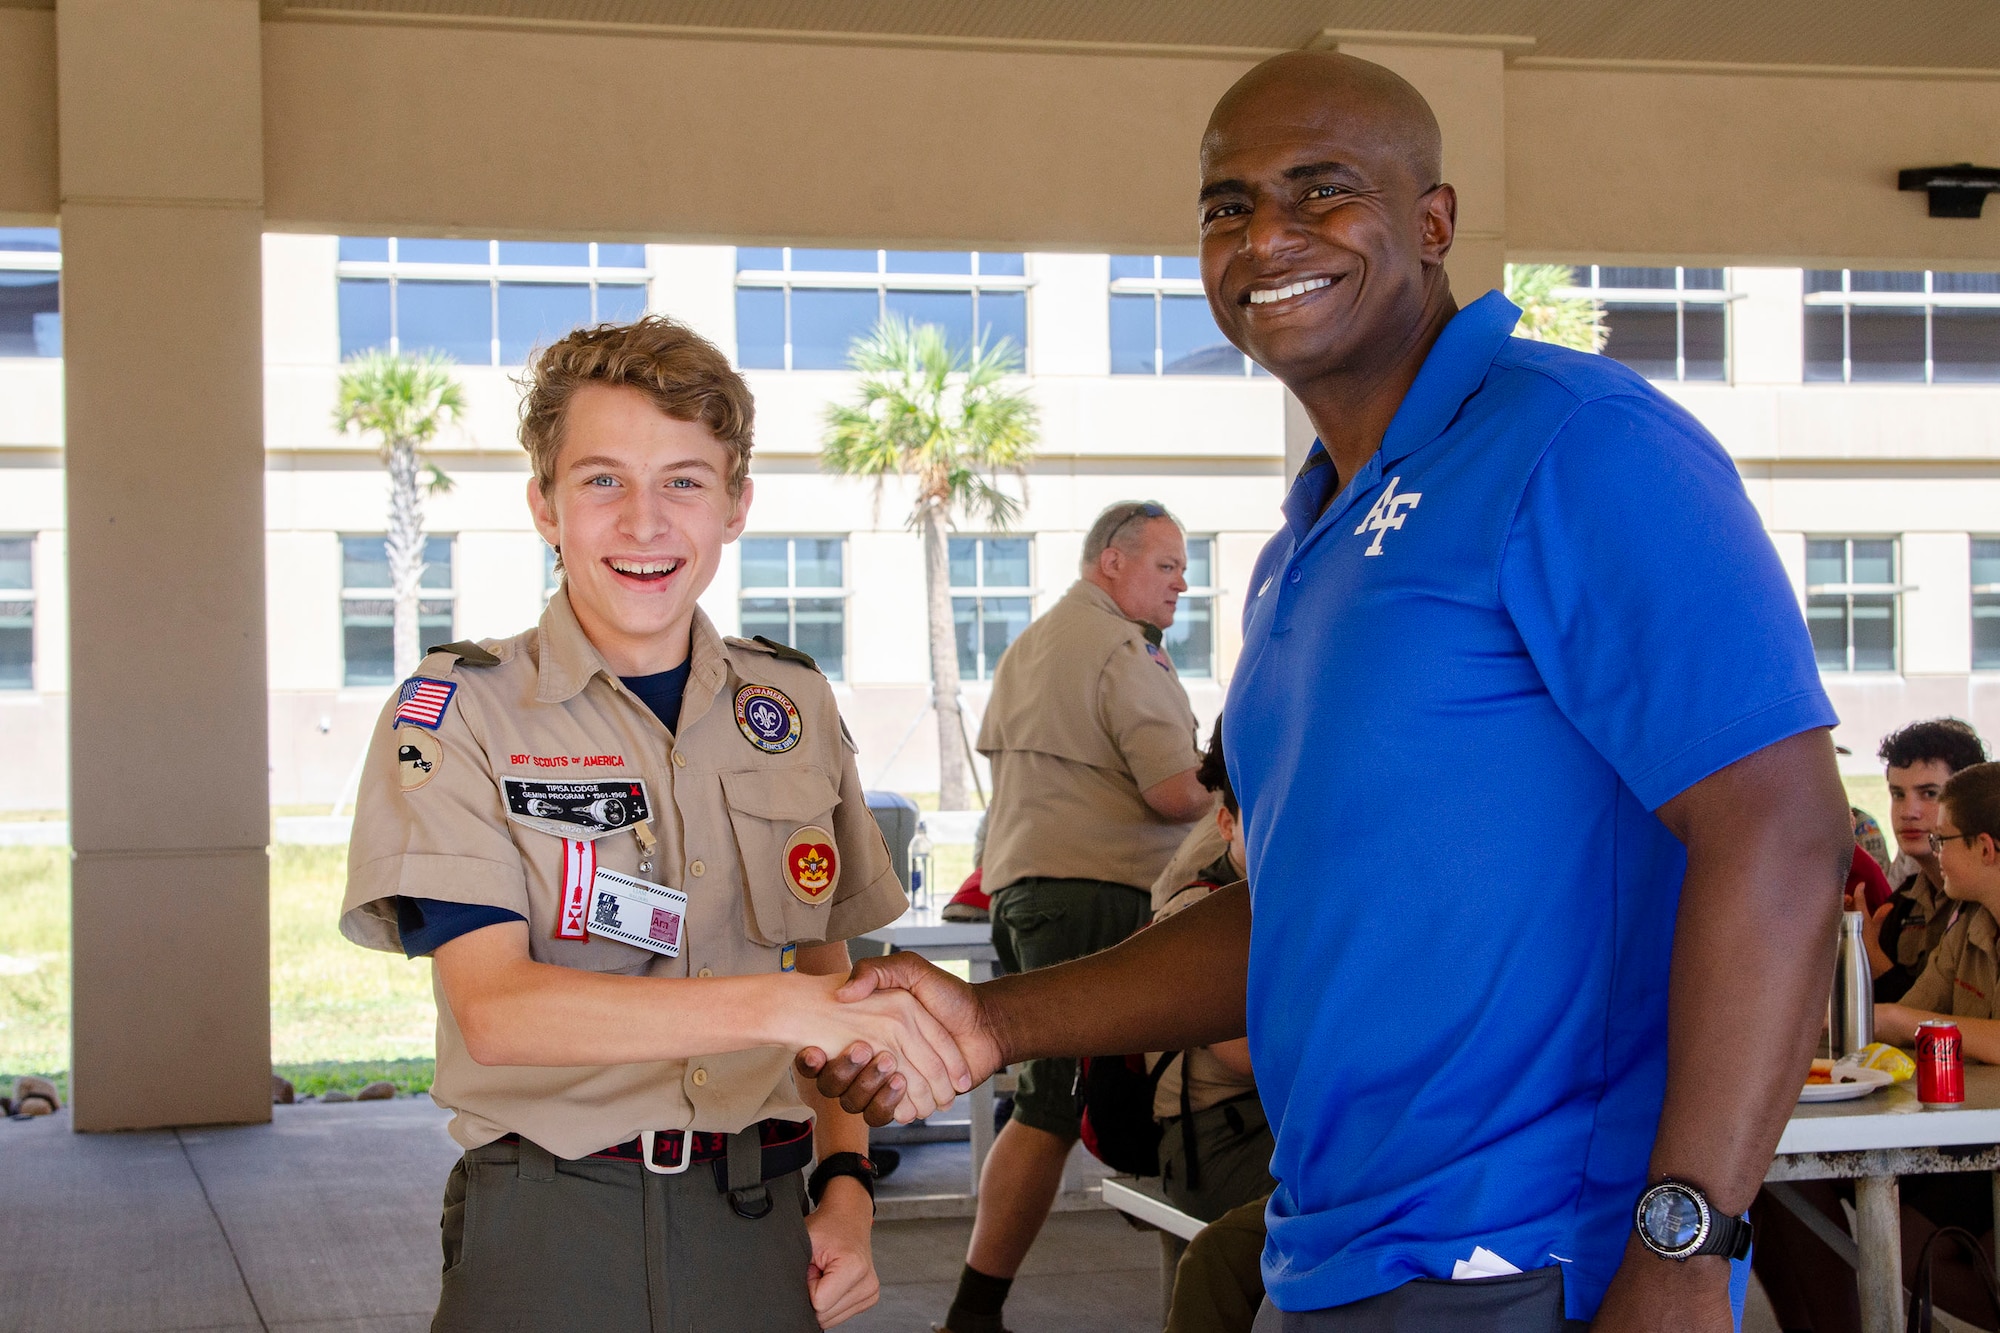 Liam Walders, a 10th grader at Holy Trinity Episcopal Academy in Melbourne, Fla., shakes hands with Col. James A. Finlayson, commander of the Air Force Technical Applications Center, after the colonel presented his challenge coin to Walders Oct. 22, 2022.  Walders was at the base with 61 other Central Florida Boy Scouts to earn the Nuclear Science Merit Badge with the help of Airmen from the nuclear treaty monitoring center.  (U.S. Air Force photo by Susan A. Romano)